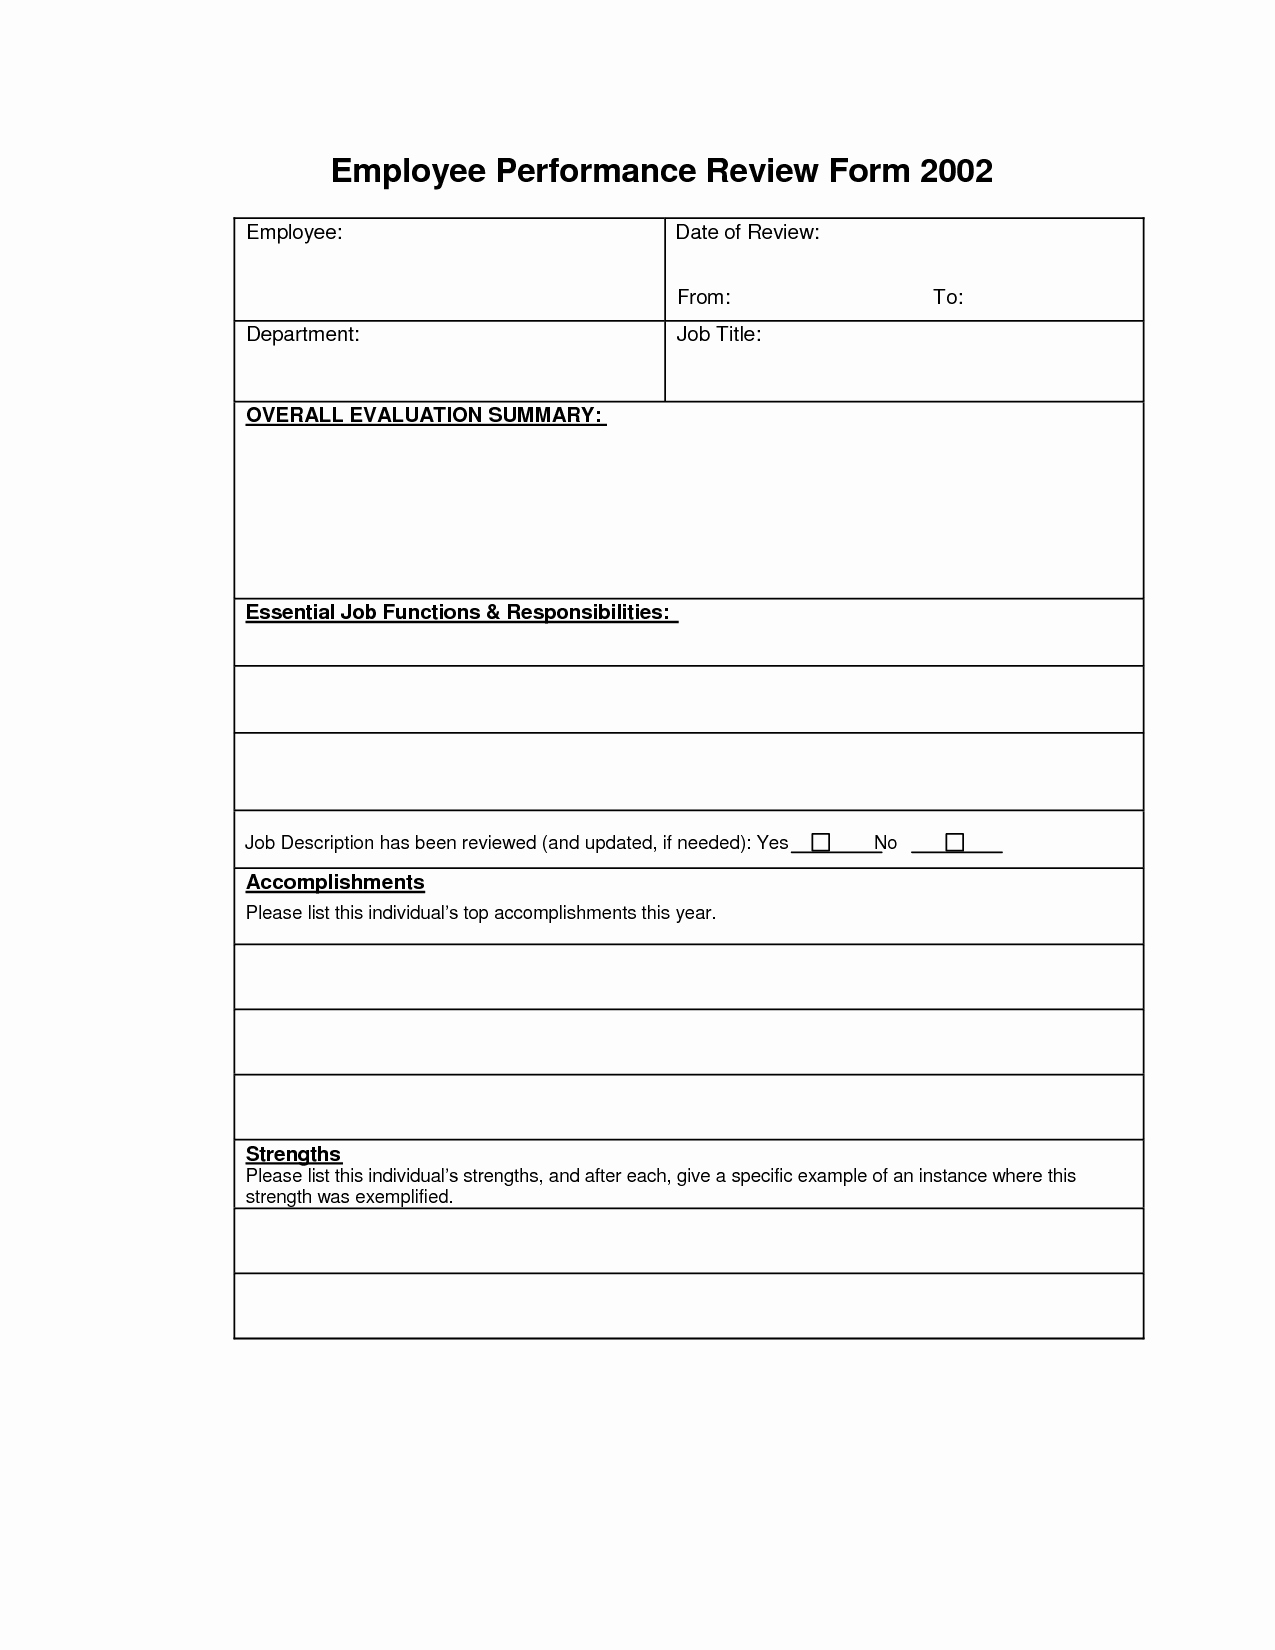 Free Employee Review Templates Elegant Employee Performance Review form Free Picture